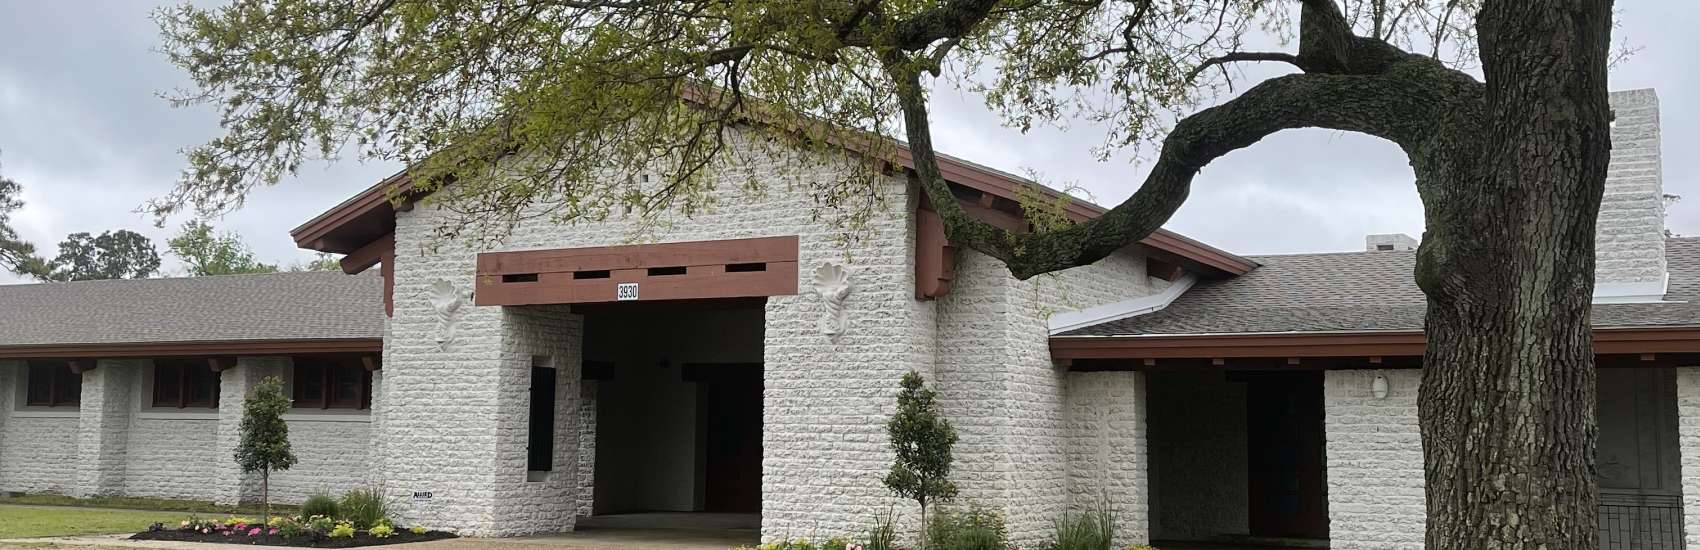 exterior of tyrrell park nature center in beaumont texas